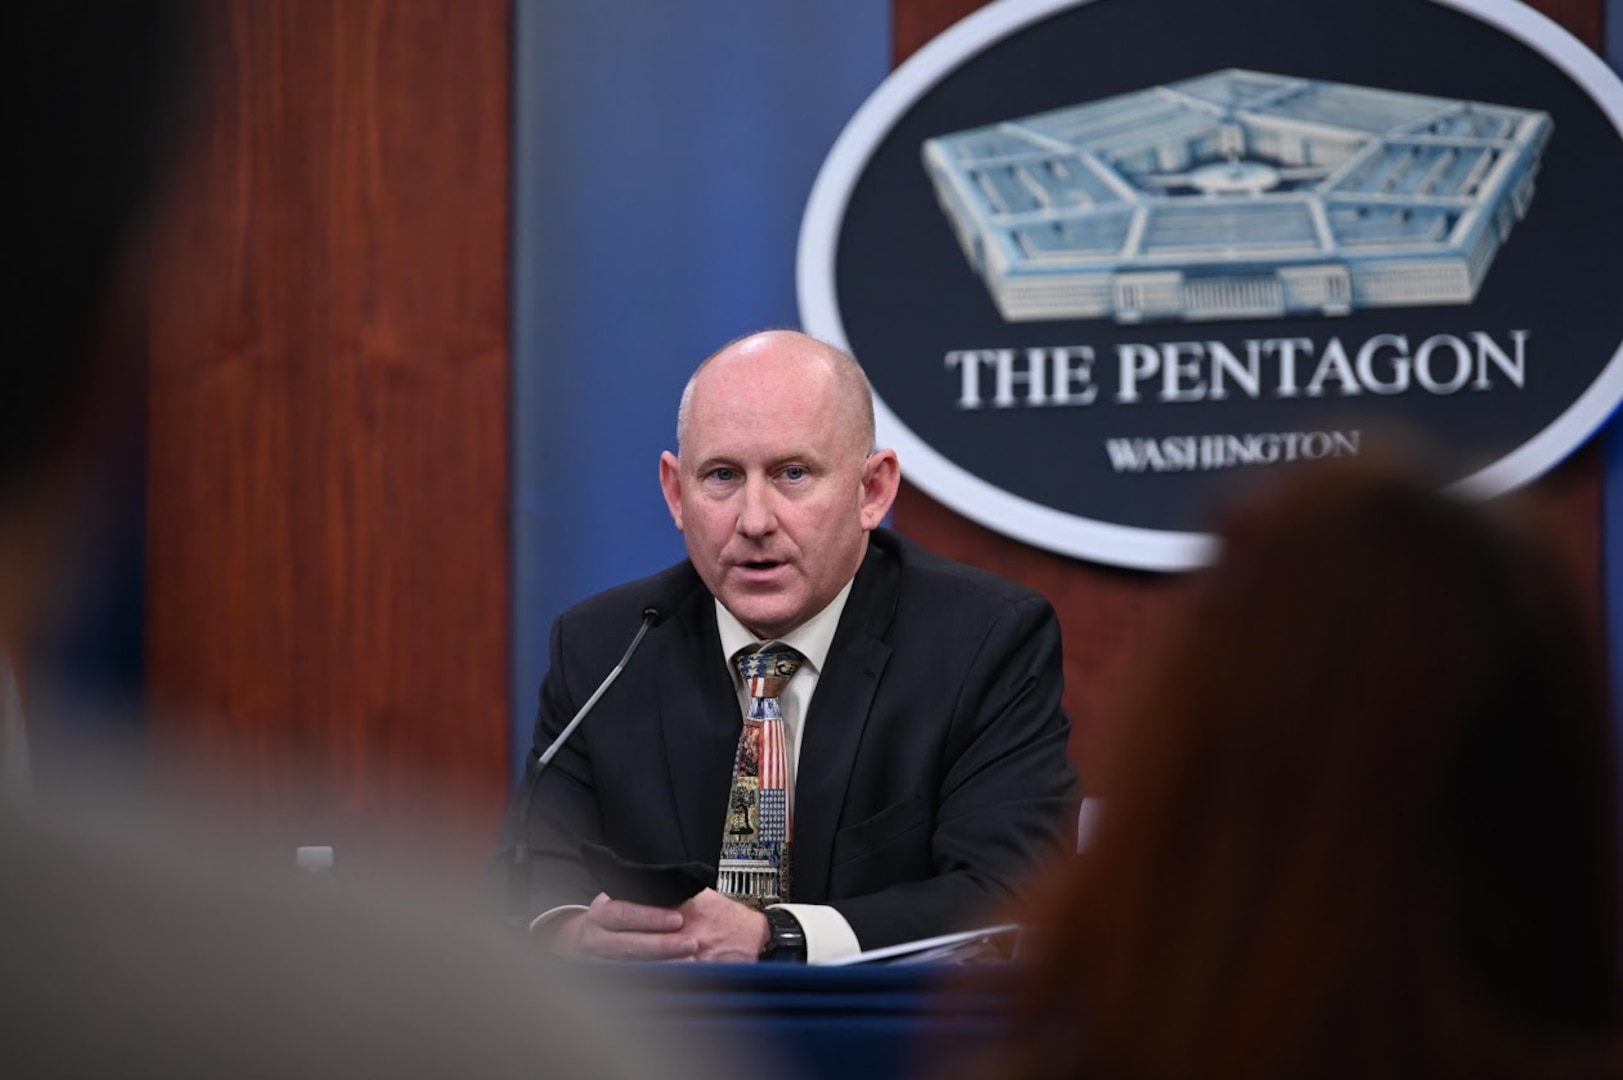 Acting Secretary of the Army John E. Whitley briefs the media at the Pentagon, Jan. 25, 2021.